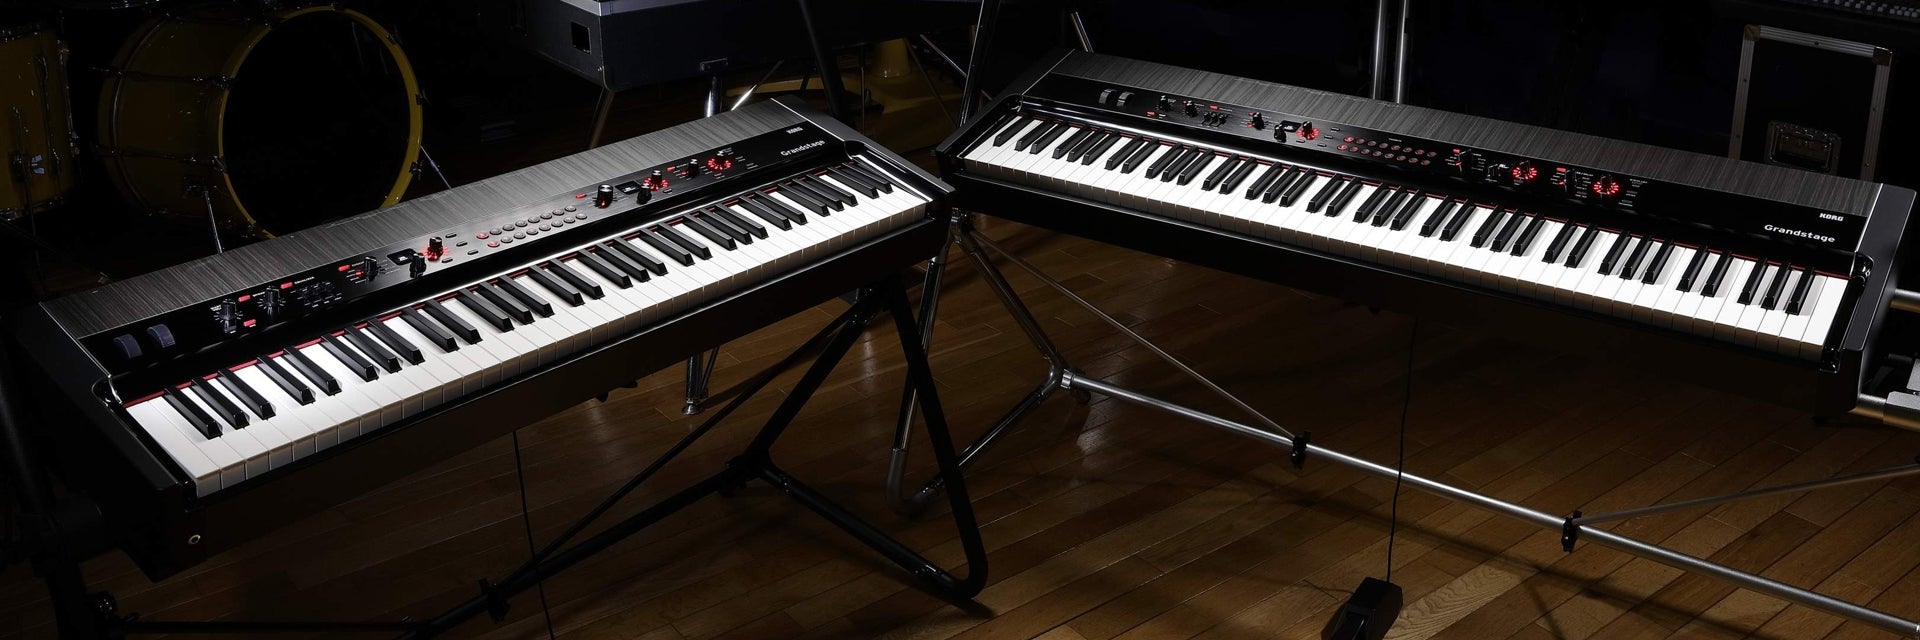 Korg Keyboards, Pianos, & Accessories